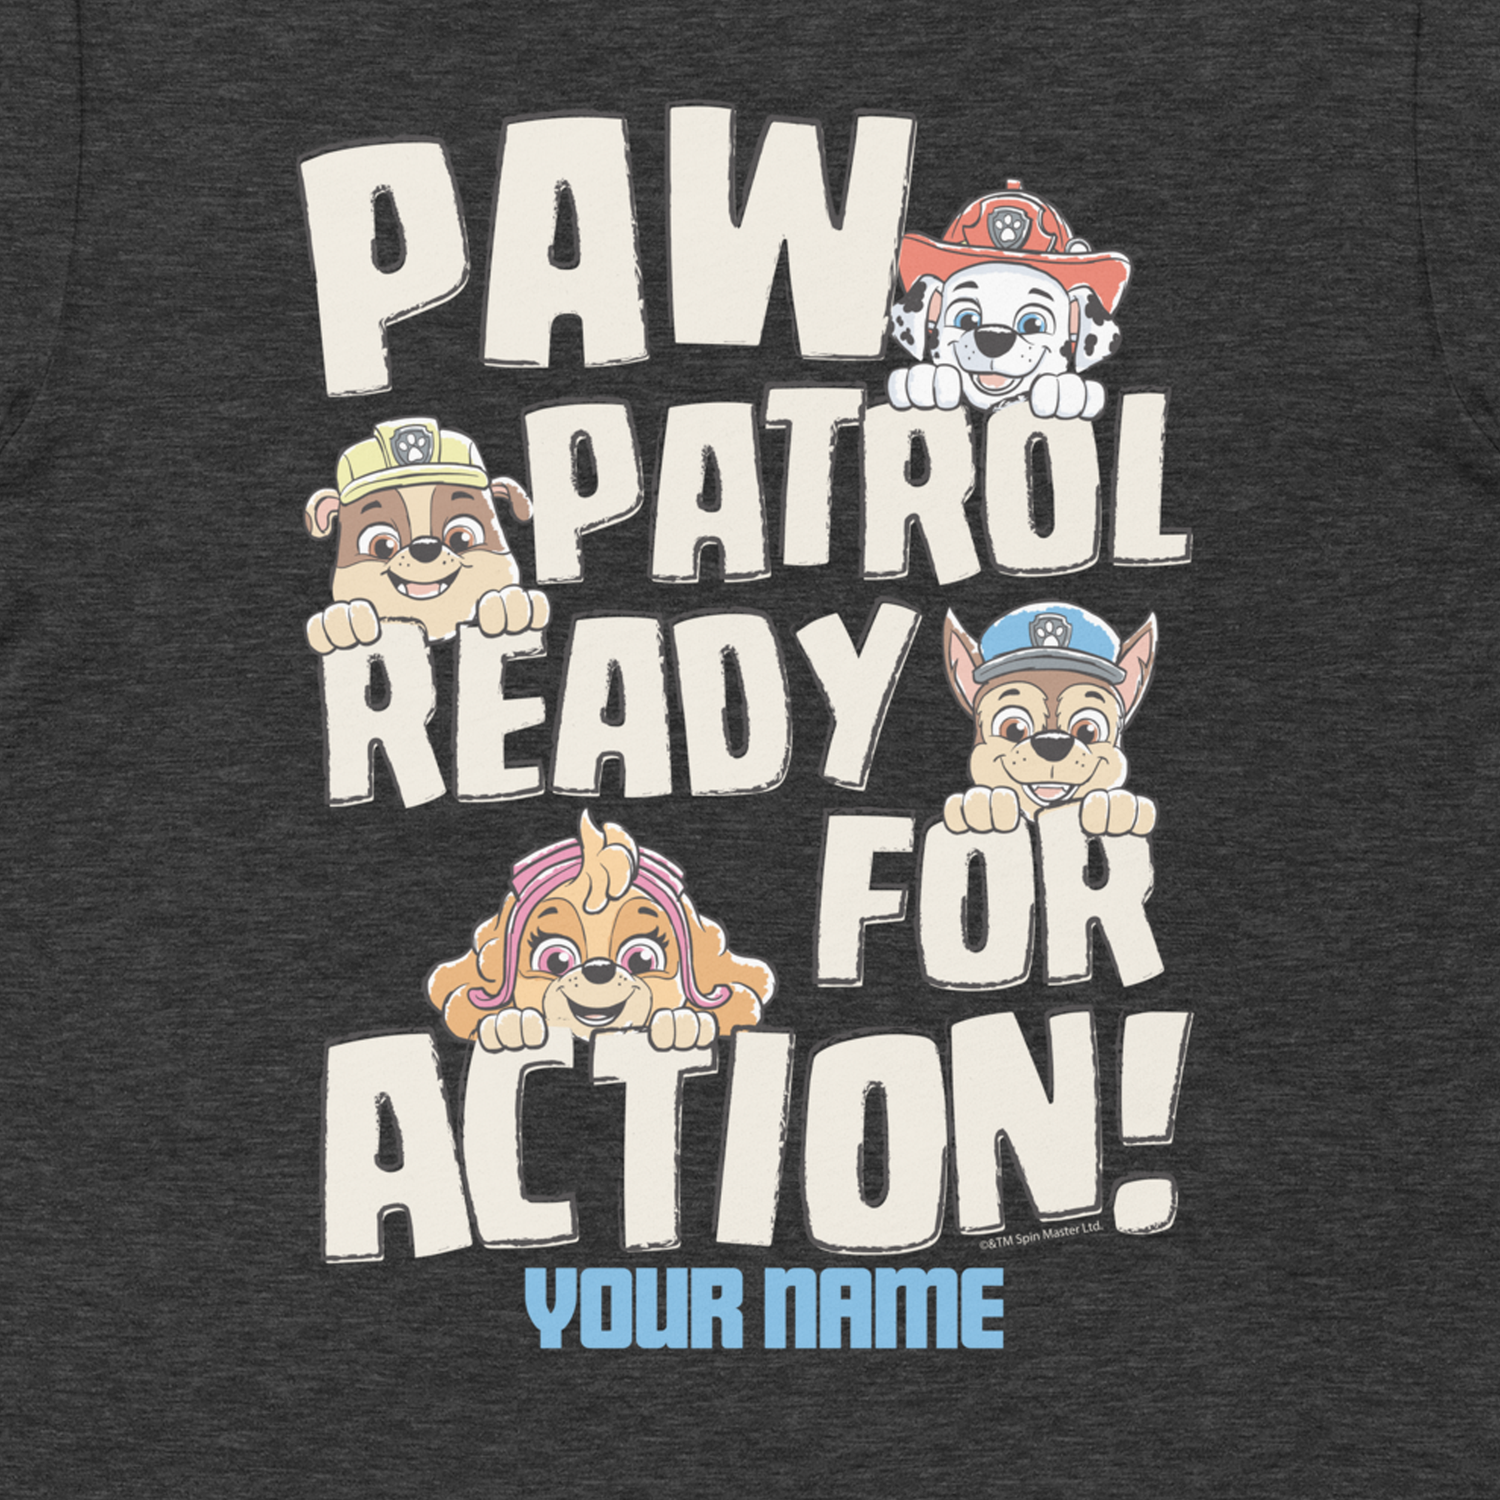 T-Shirt Adult Short Action Ready Paramount Sleeve Patrol For Personalized Shop PAW –